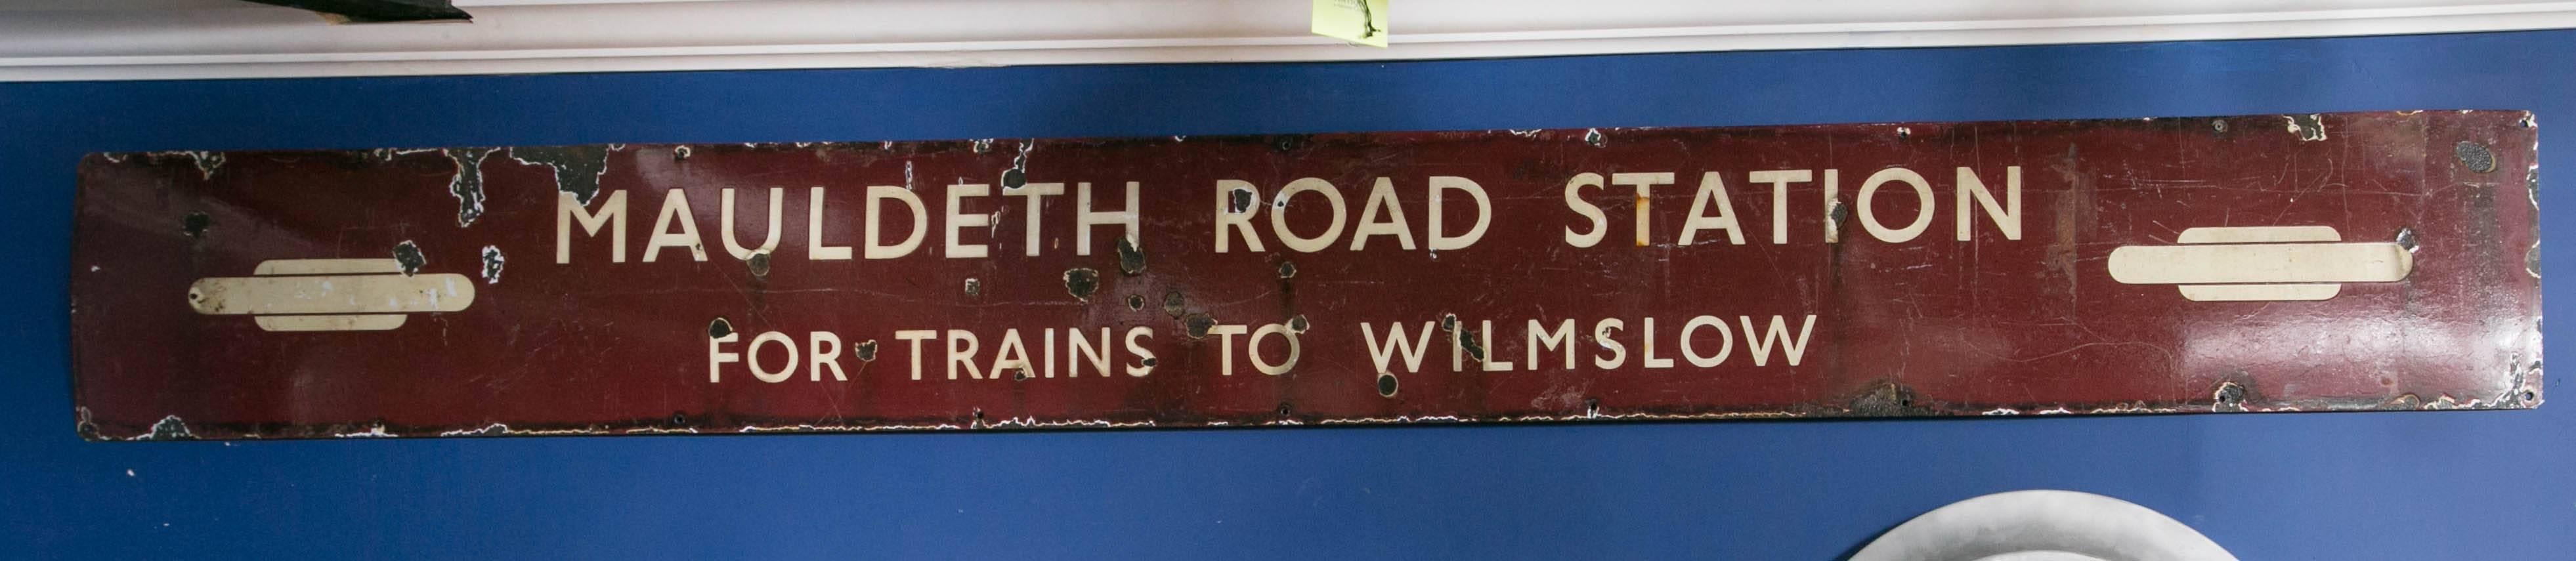 Vintage porcelain enameled, painted sign from the Mauldeth railway station which opened in 1909. This station serves the Ladybarn area of Manchester, England. When the rail line was electrified in the 1960s after using coal fired steam engines for